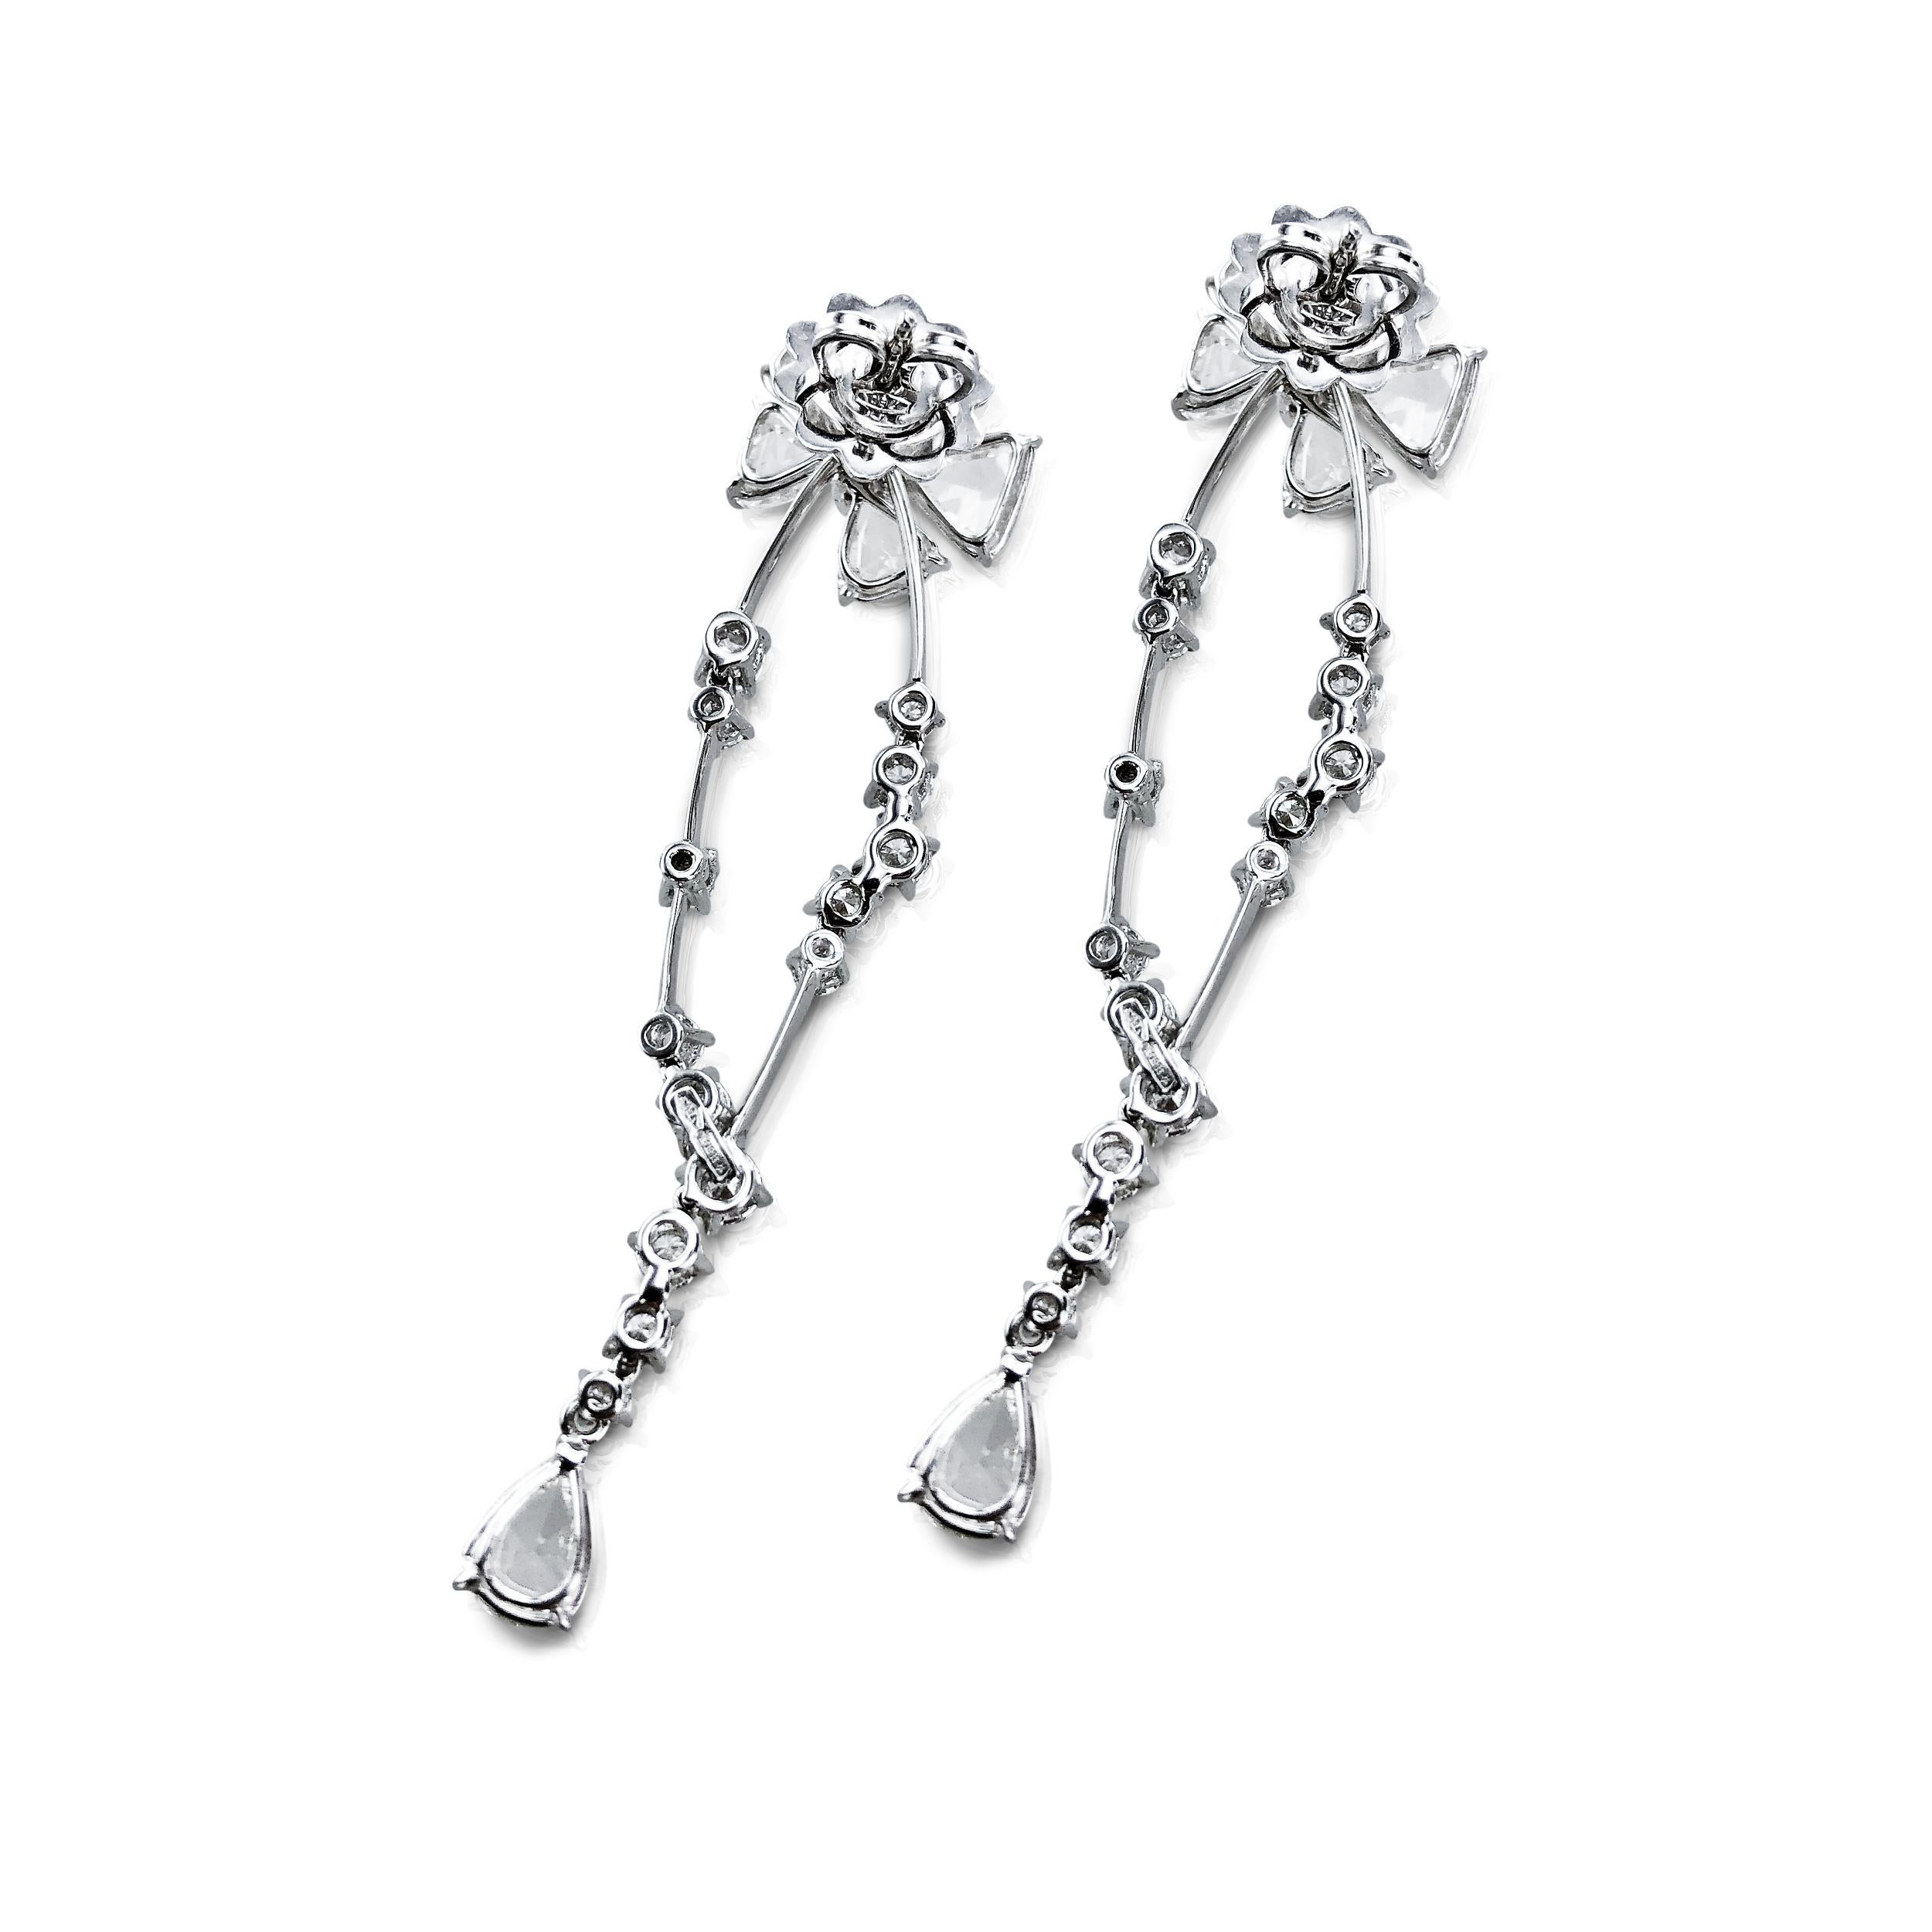 These 7.42 Carat diamond Rose Cut dangling earrings are beautifully set in 18kt white Gold.  

The unique craftmanship dangles Rose Cut diamond bows (1.5cm width by 1.1cm length each bow), that are securely held in place on the ears with butterfly